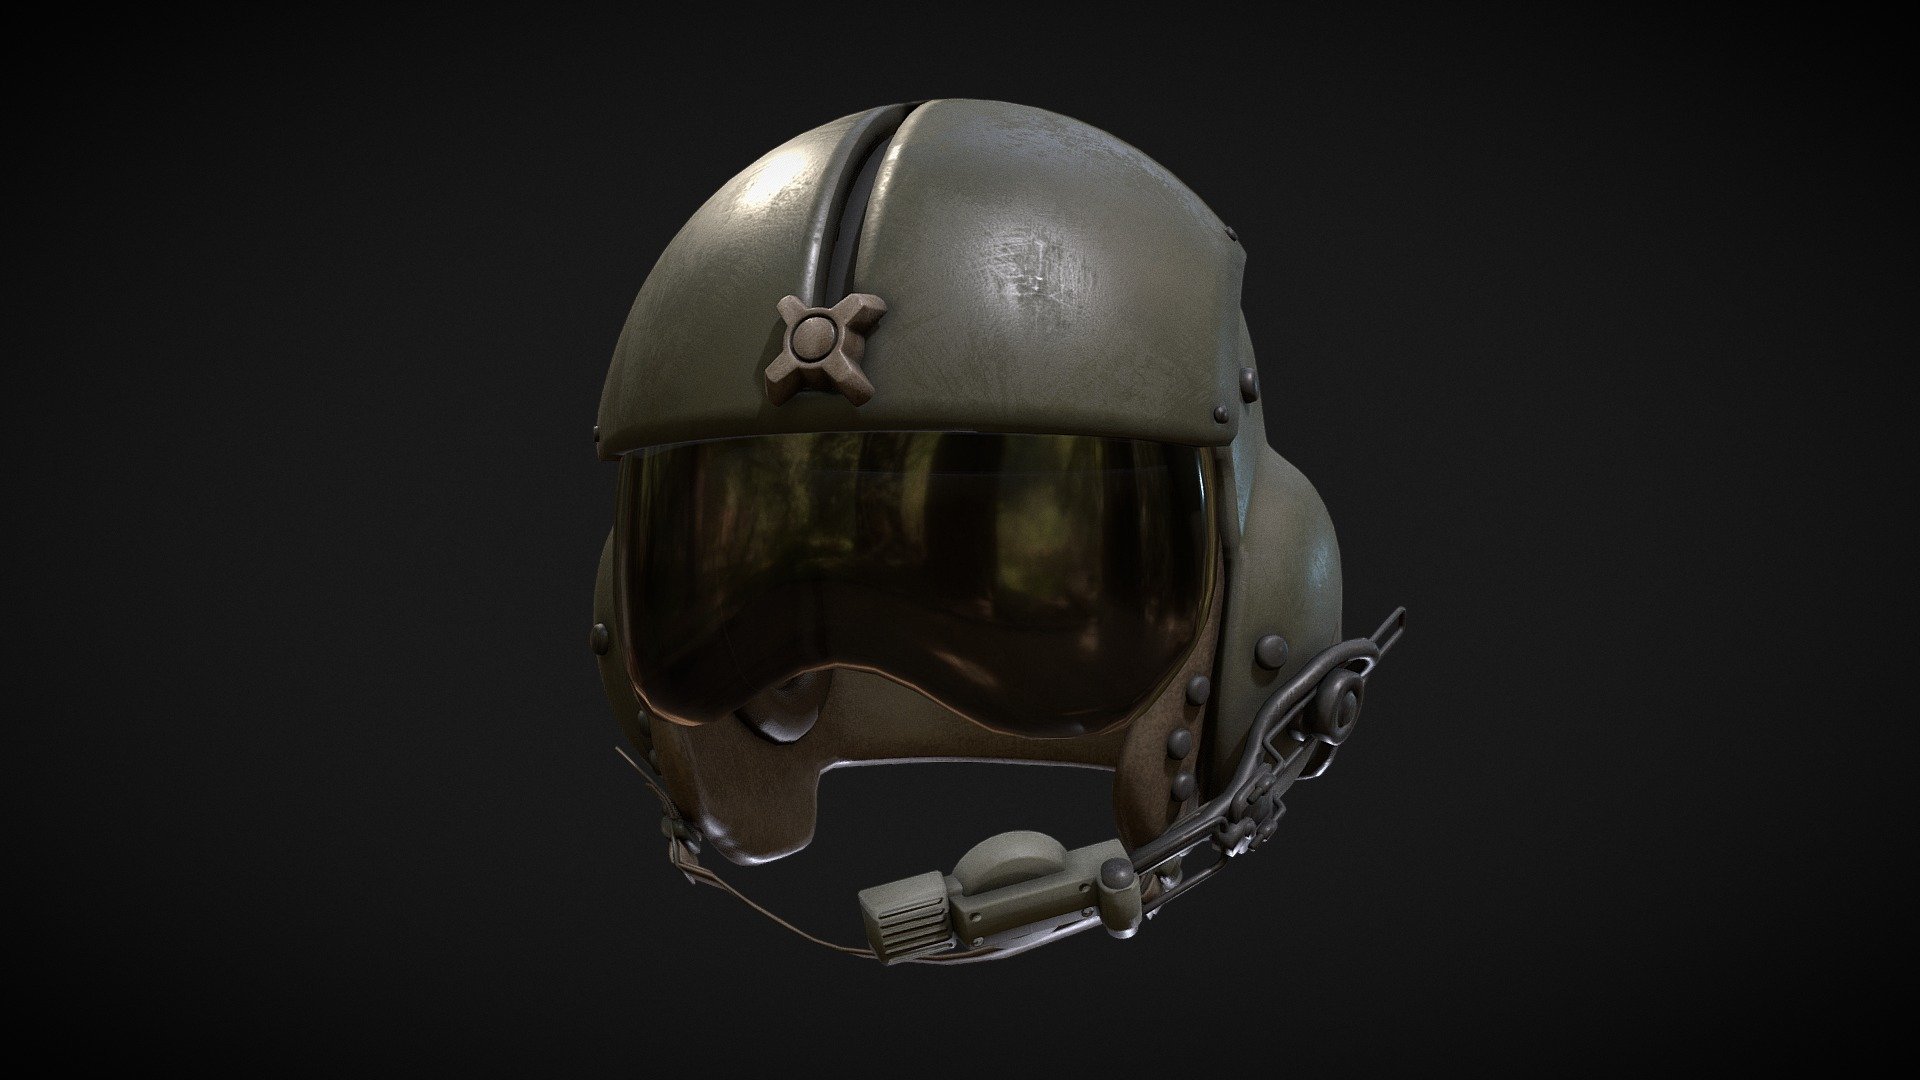 Vietnam U.S Military Gentex SPH-4 Pilot Helmet - Made for the Arma 3 Dune Holy Wars Mod

Must give credit to Outworld Studios if using this asset.

Show support by joining my discord: https://discord.gg/EgWSkp8Cxn - Vietnam U.S Military Gentex SPH-4 Pilot Helmet - Buy Royalty Free 3D model by Outworld Studios (@outworldstudios) 3d model